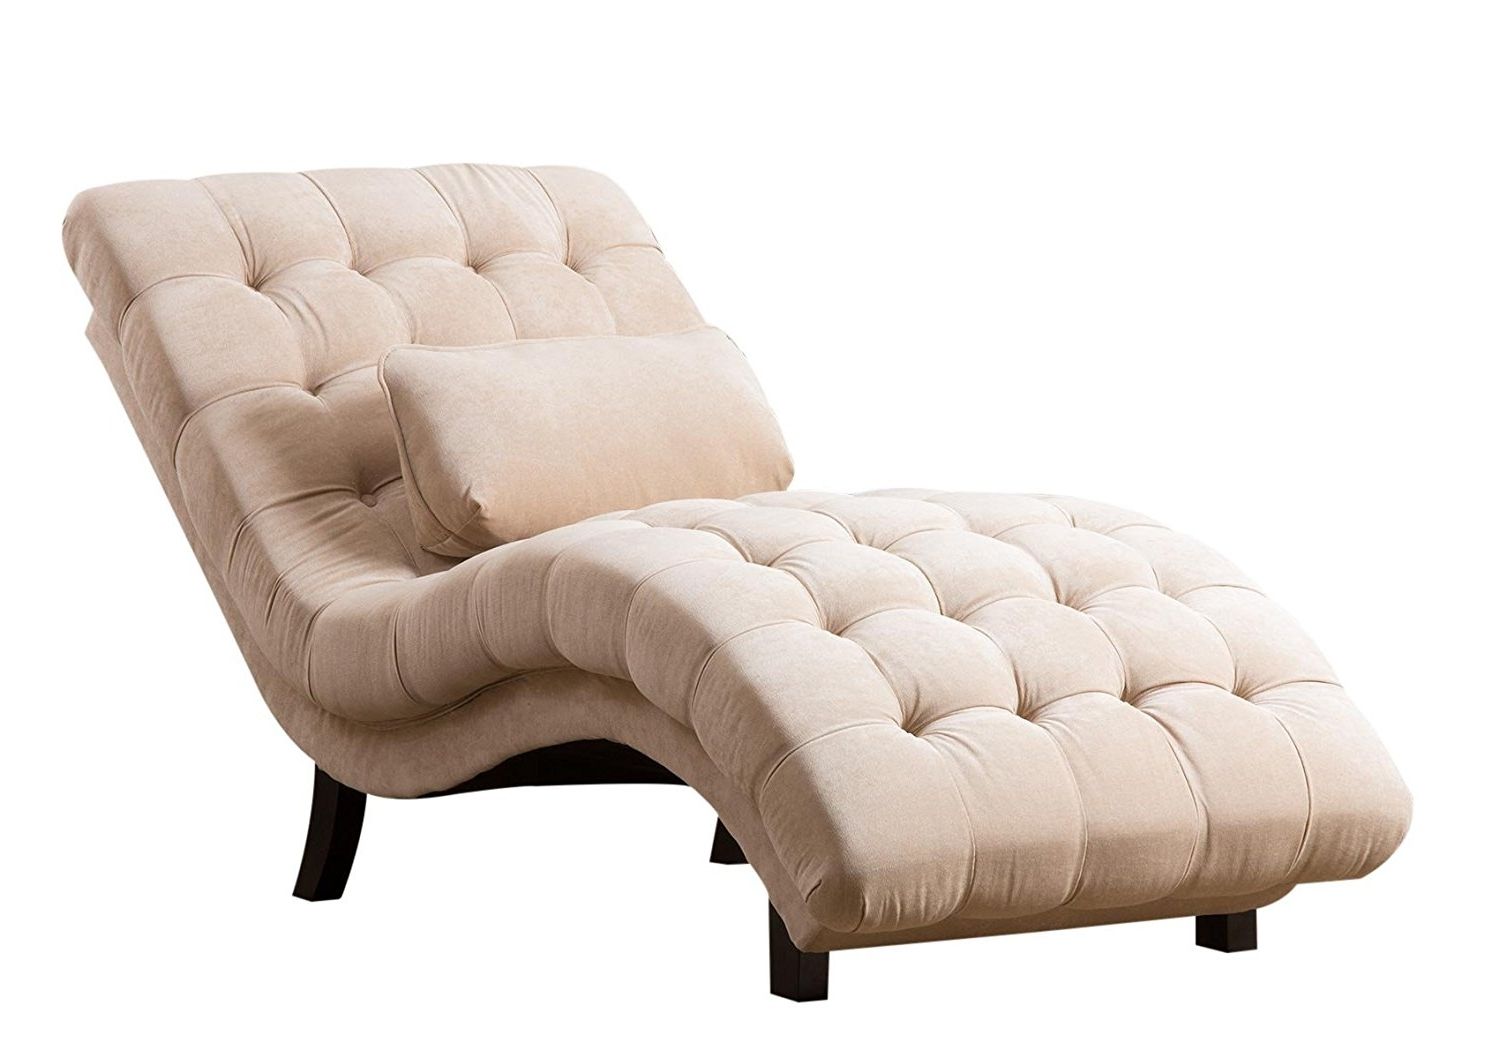 Cream Chaise Lounges Throughout Most Up To Date Amazon: Abbyson Carmen Cream Fabric Chaise: Home & Kitchen (View 2 of 15)